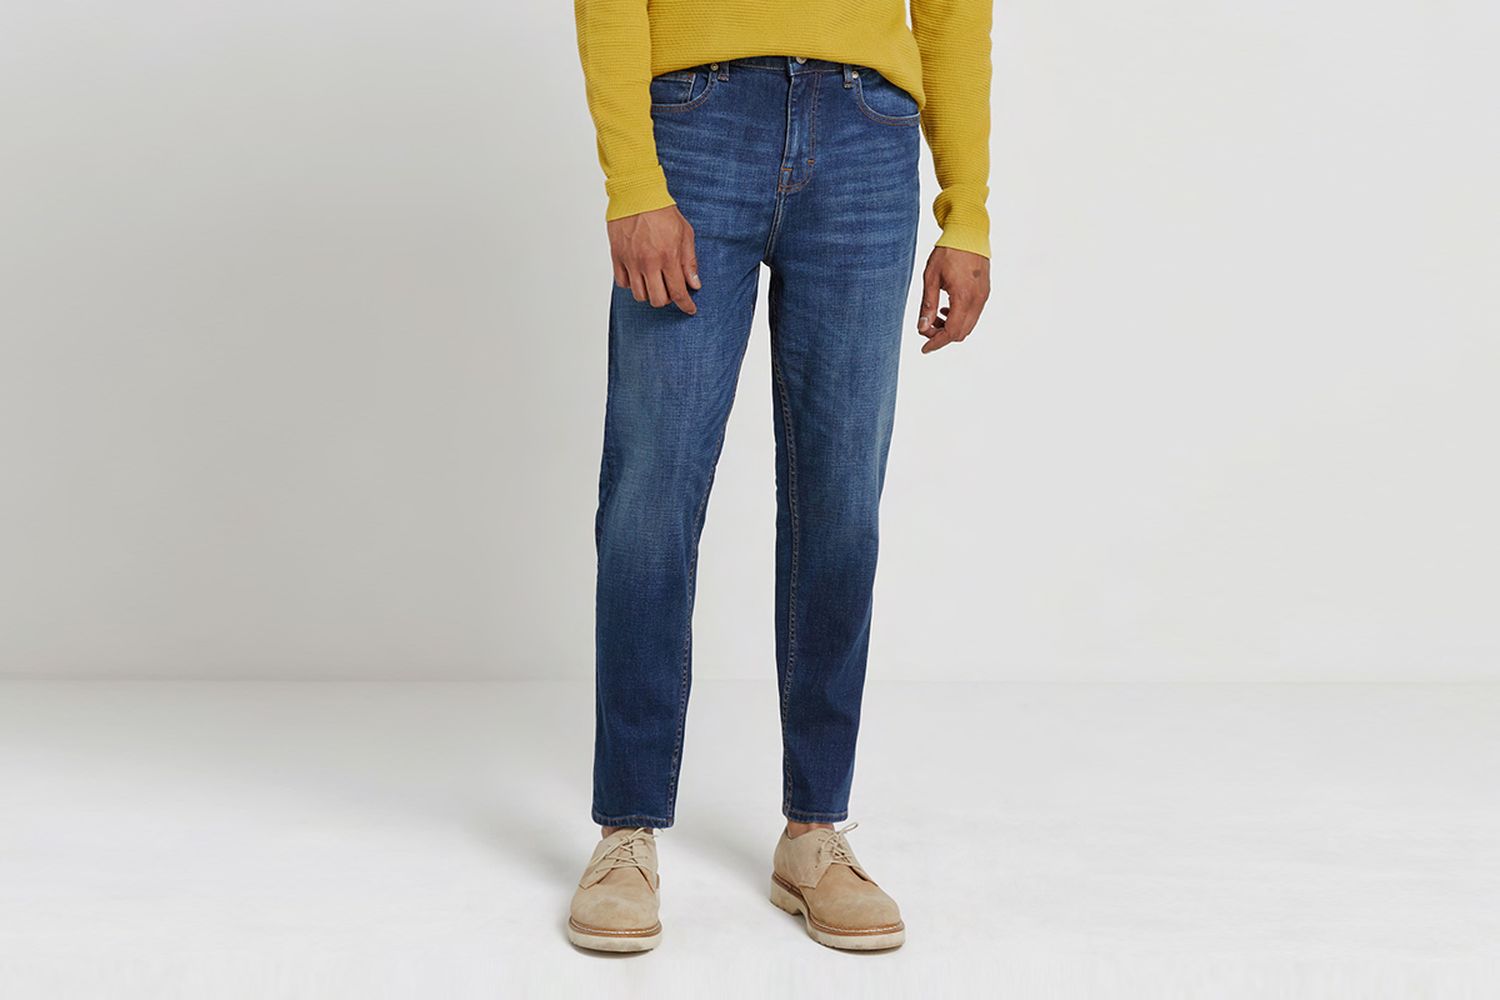 The Iggy Tapered Fit Jean